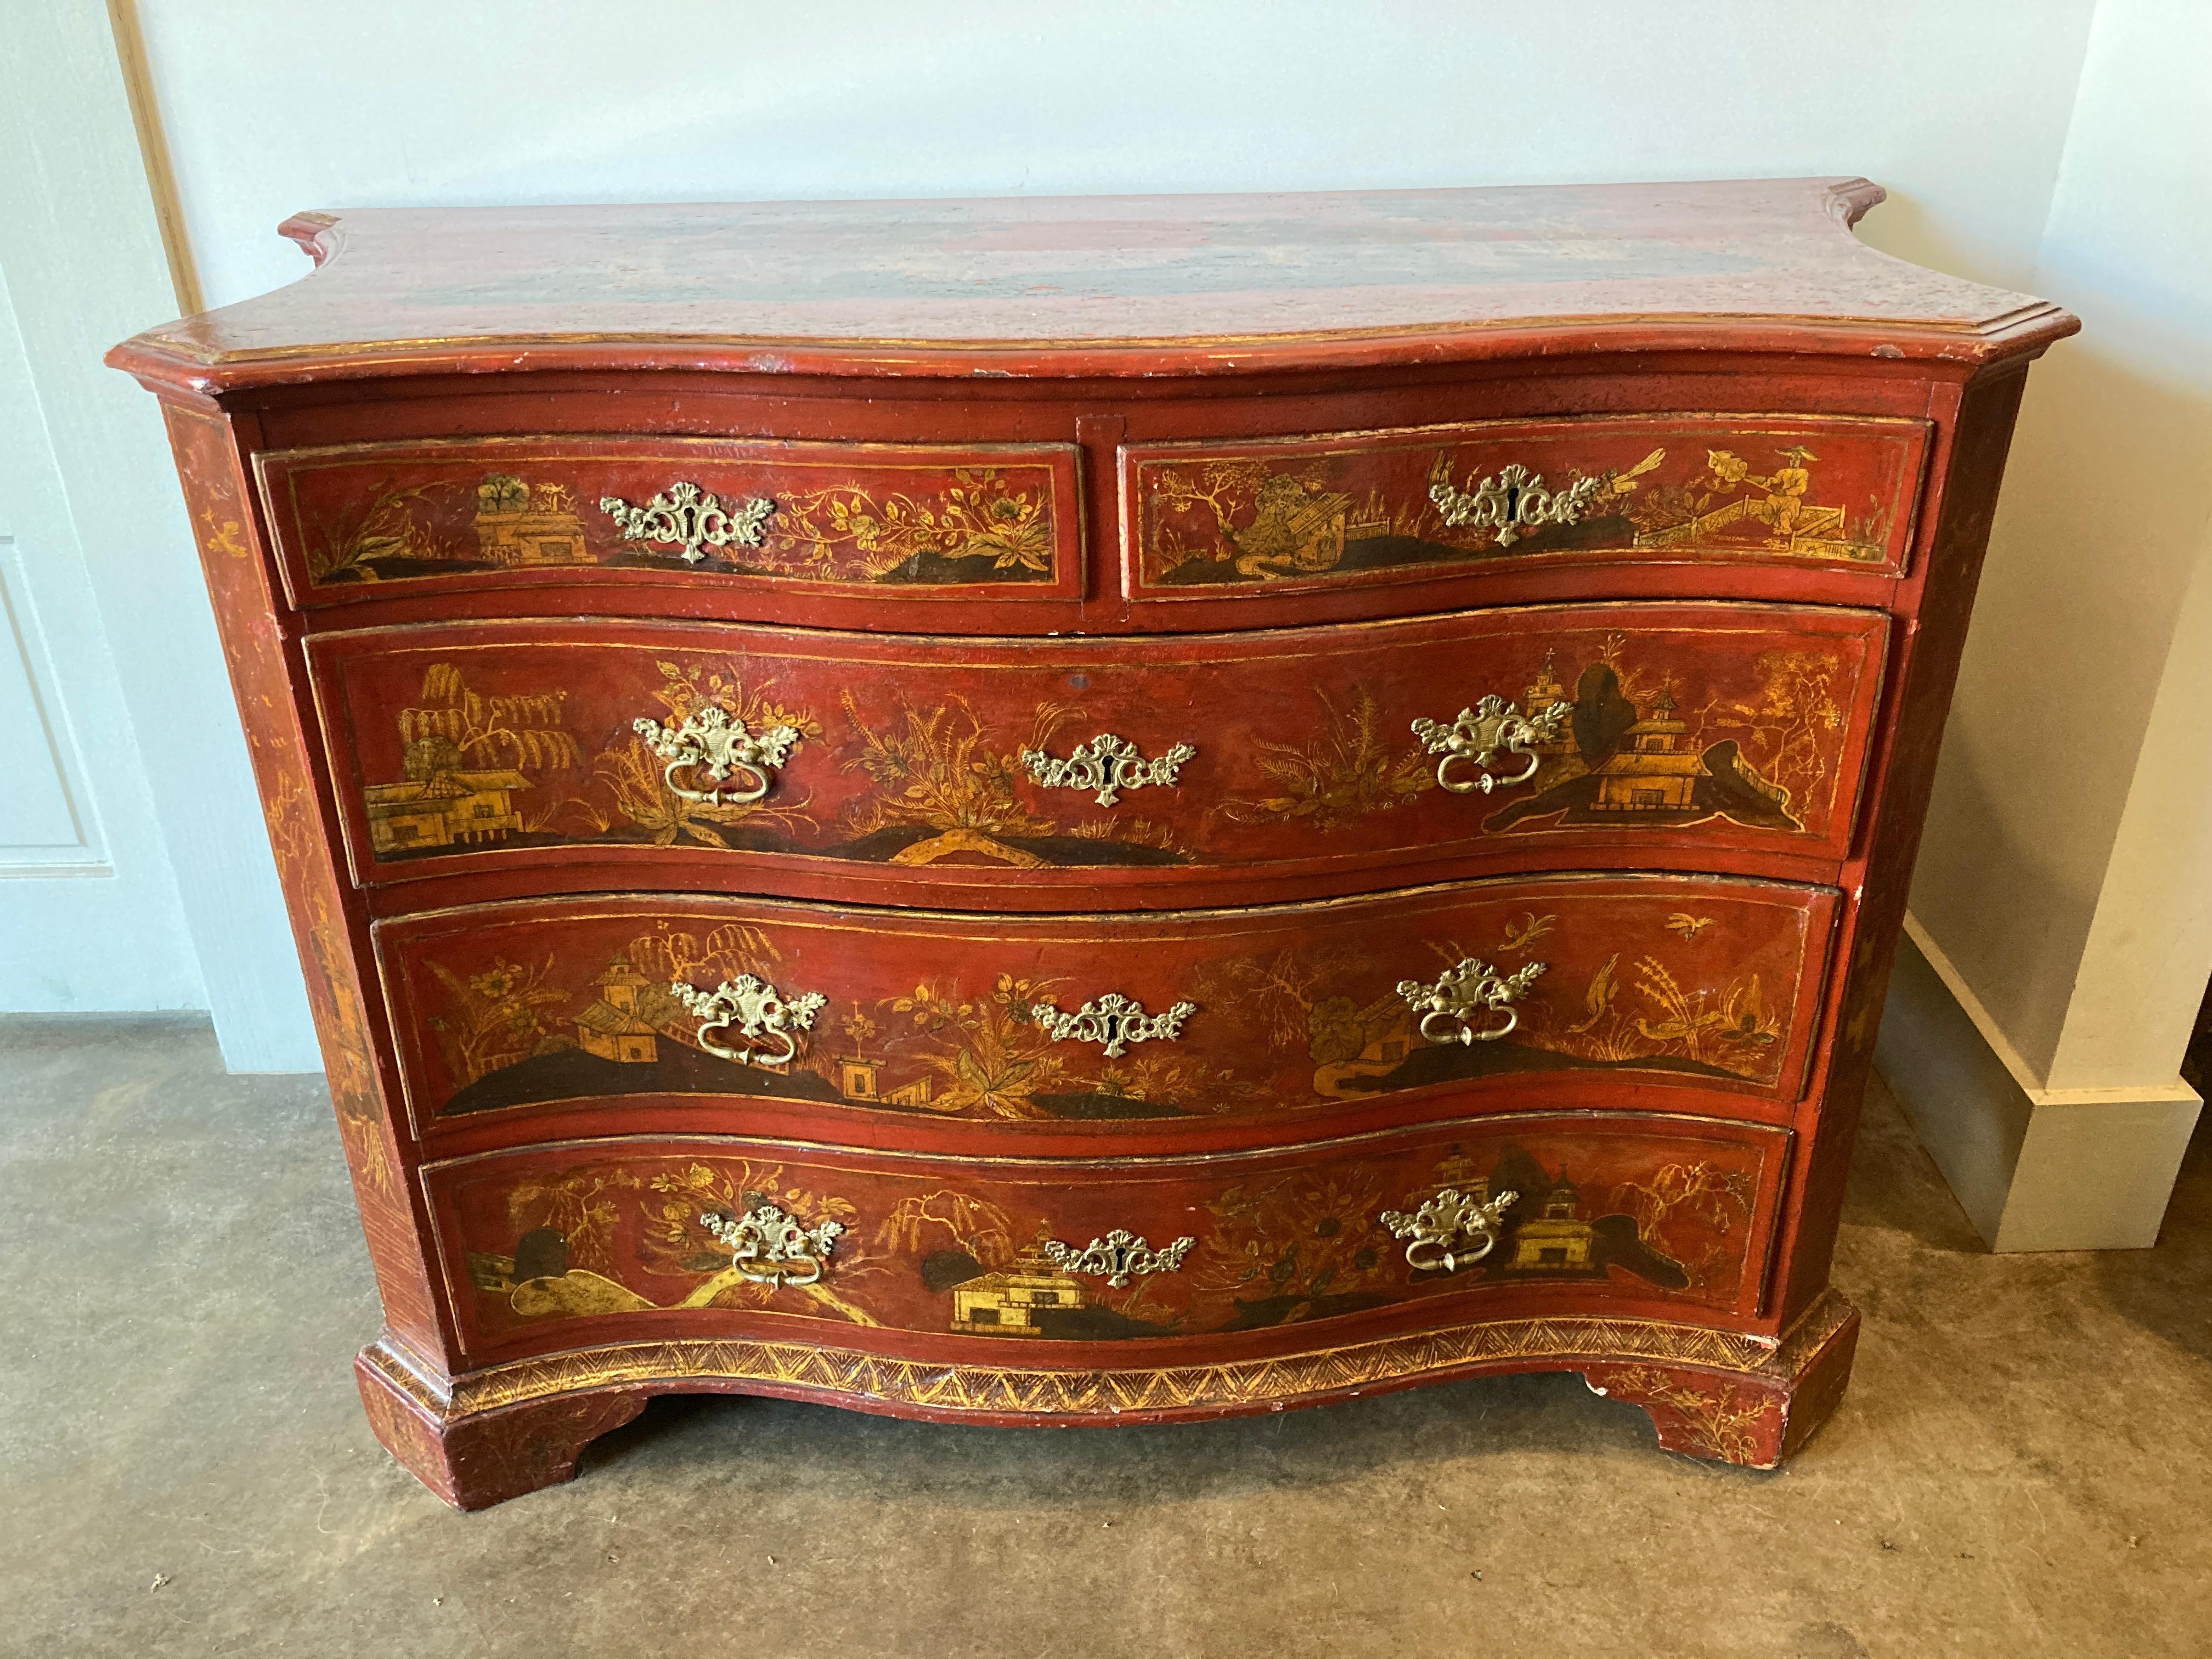 Red lacquered Italian commode with bucolic and chinoiserie decoration in paint and gilding. This 18th century chest of drawers is a serpentine shape with curved sides and has five drawers with period hardware.